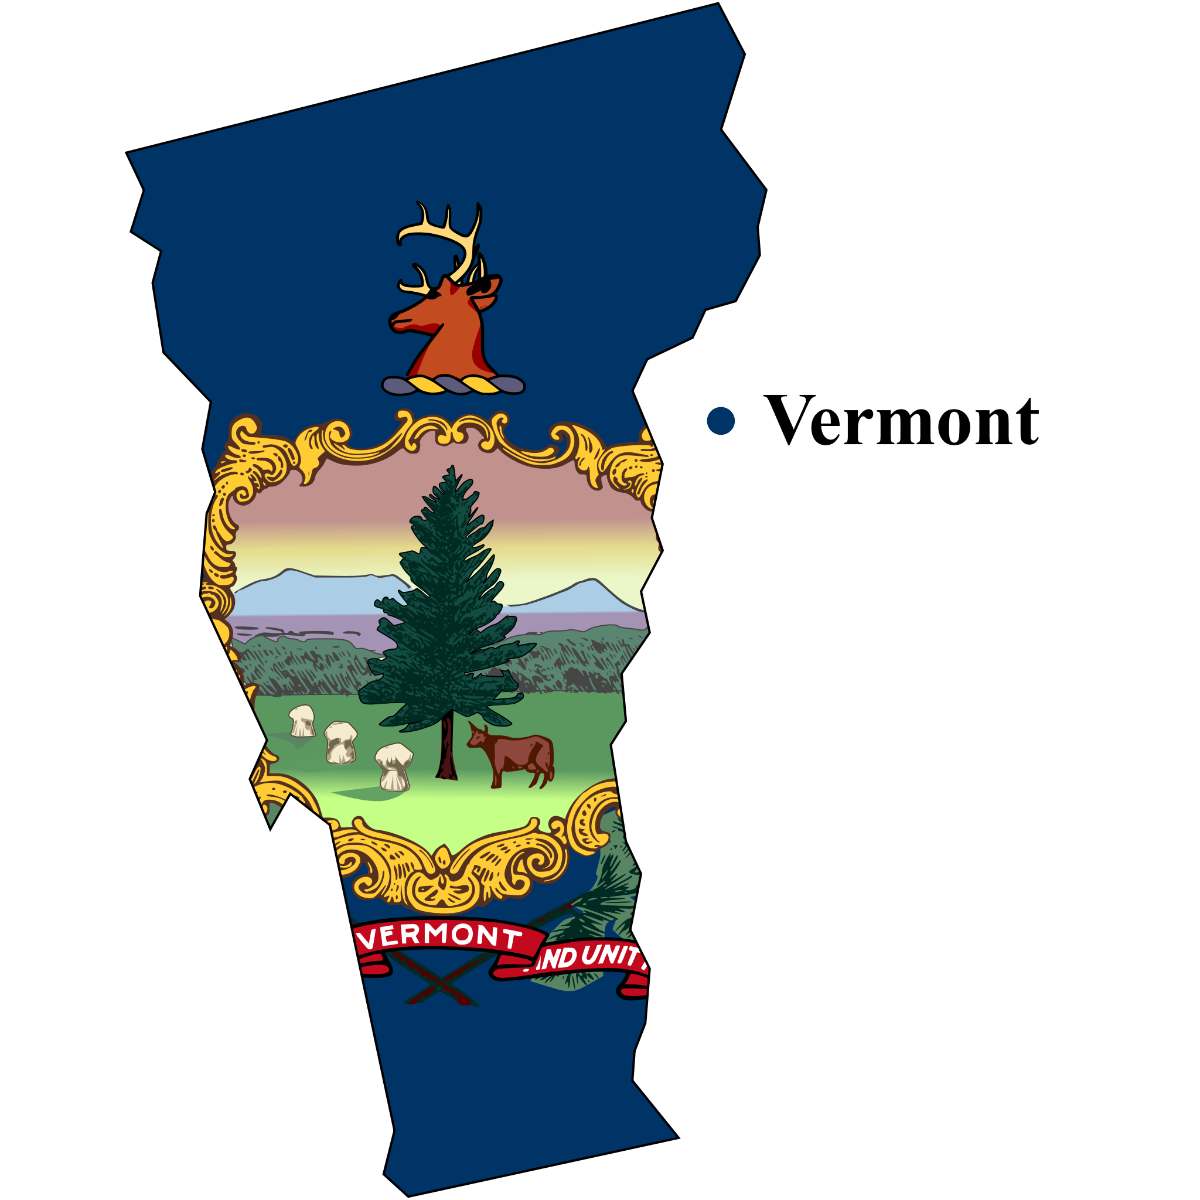 Vermont State map cutout with Vermont flag superimposed